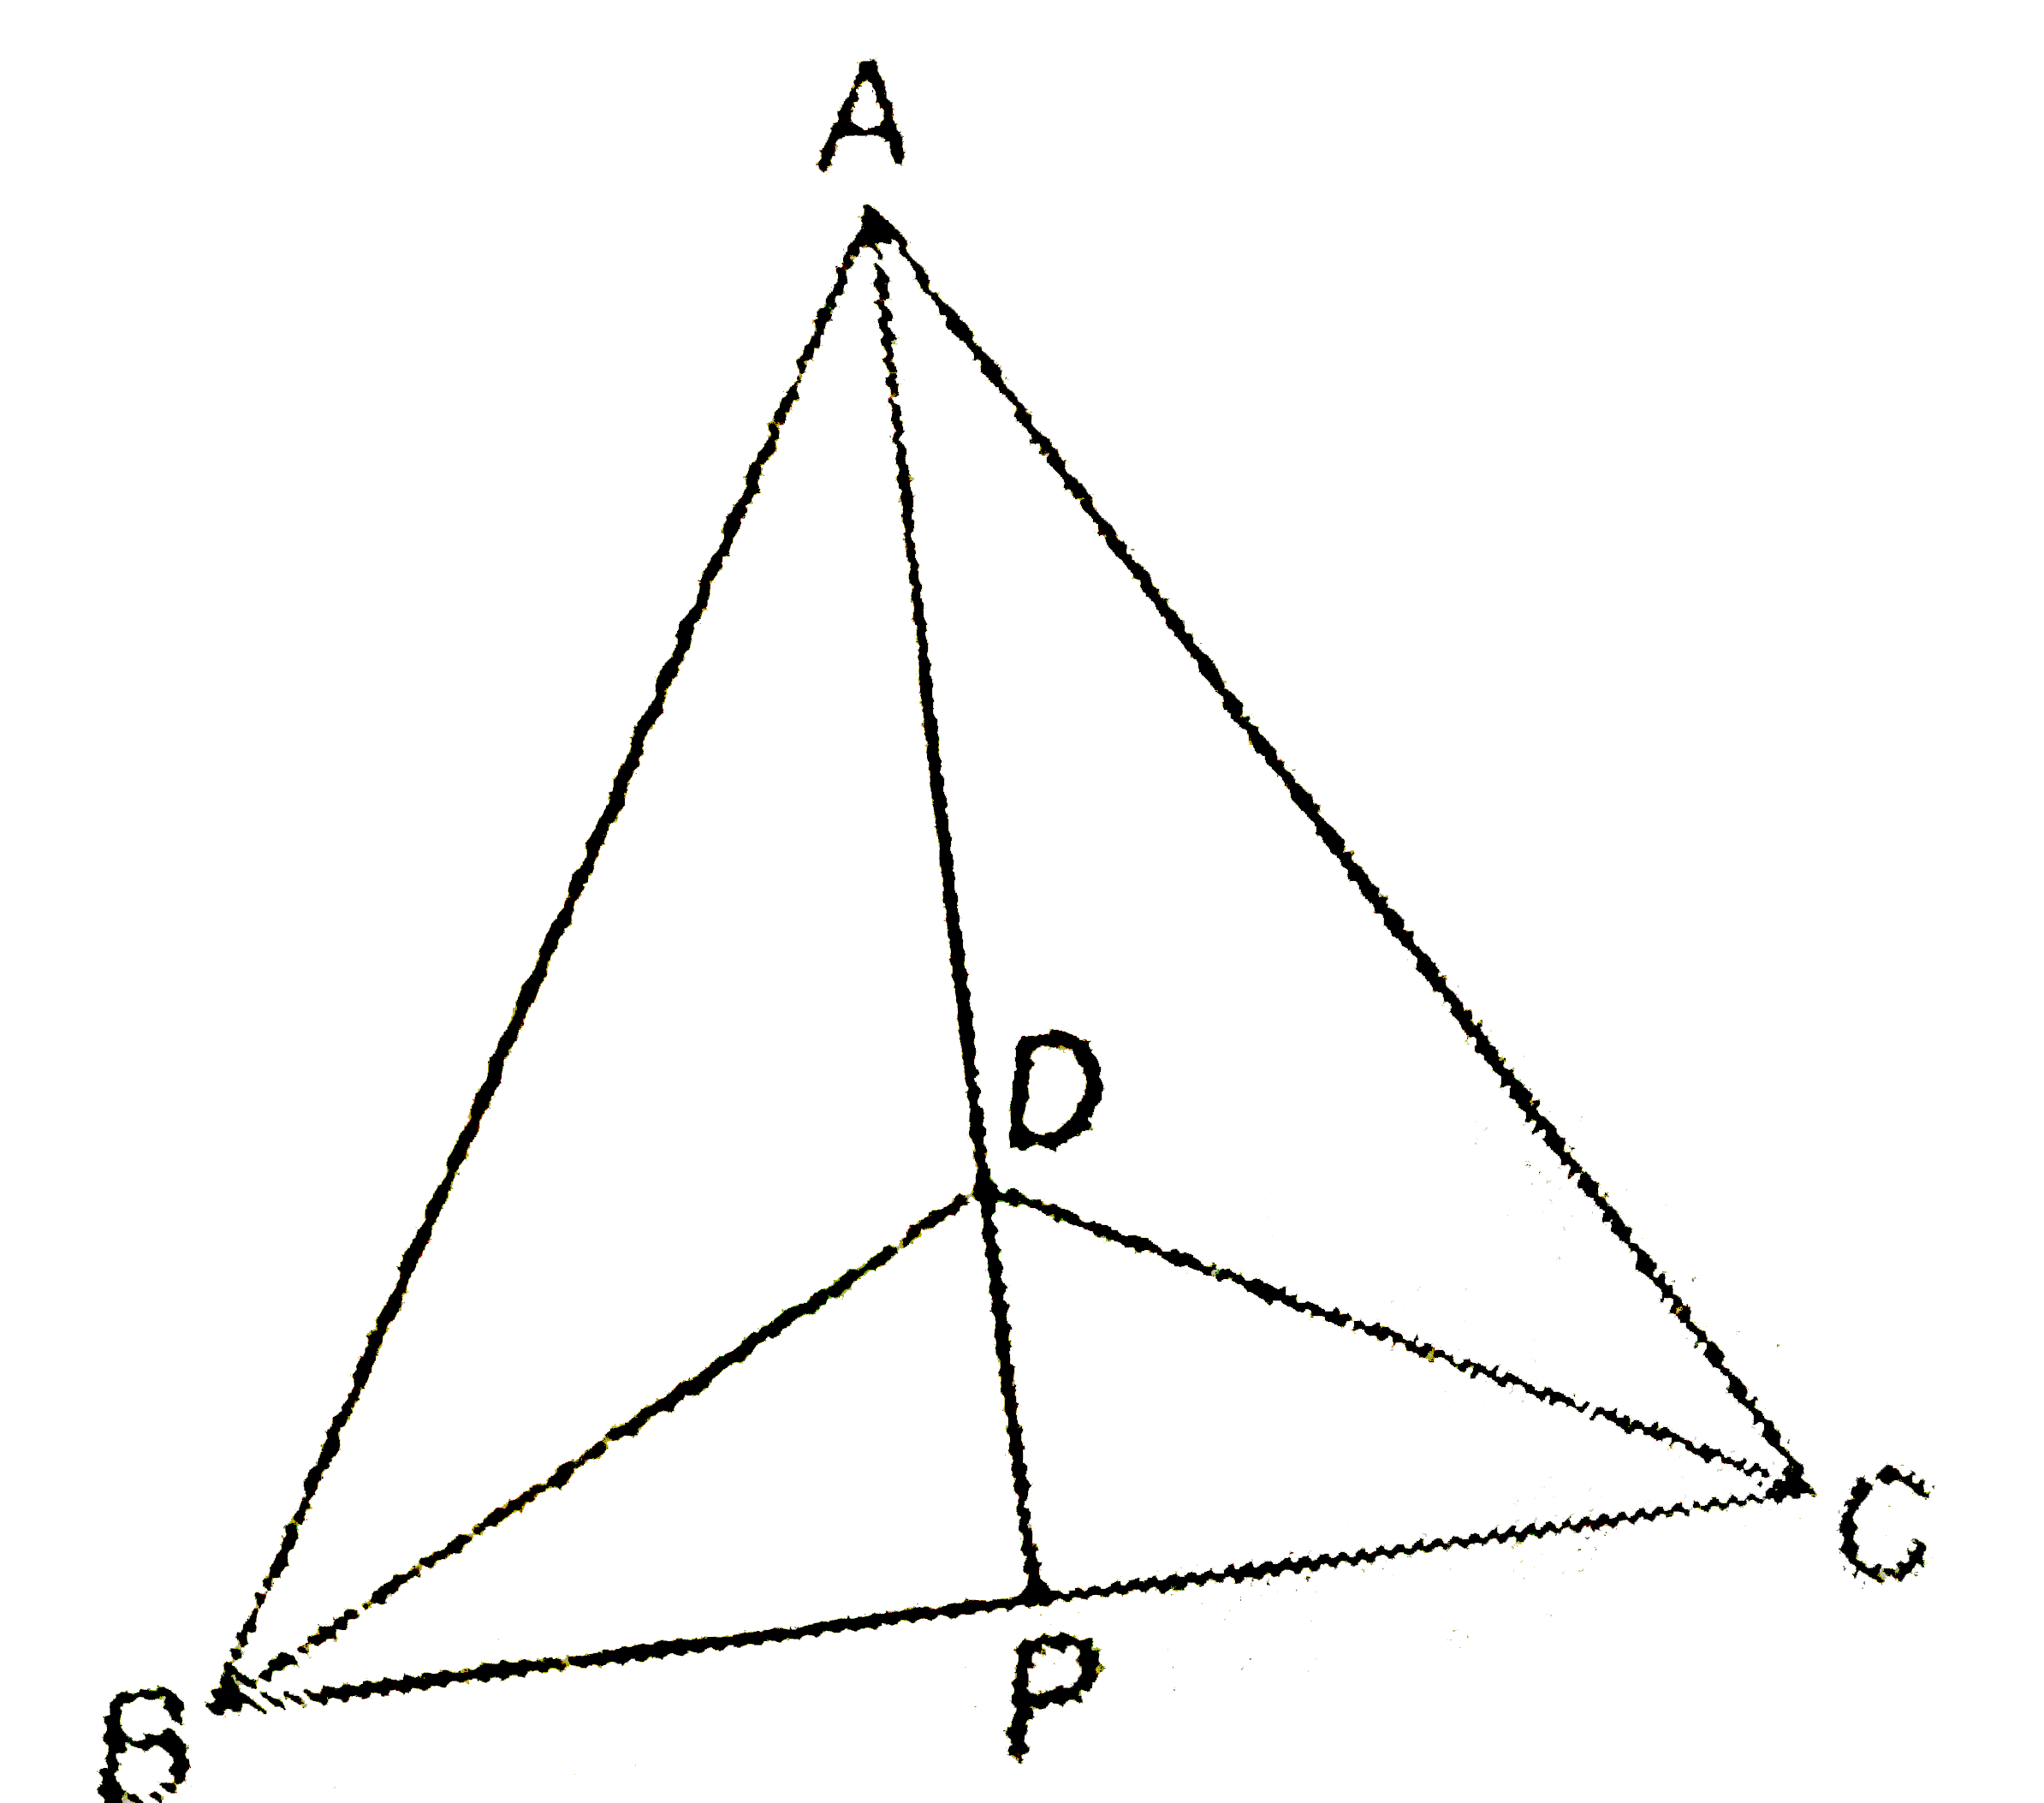 DeltaABC and DeltaDBC are two isosceles triangles on the same base BC and vertices A and D are on the same side of BC (see figure). If AD is extended to intersect BC at P, show that :   (i) DeltaABD cong DeltaACD   (ii) DeltaABP cong DeltaACP   (iii) AP bisects angleA as well as angleD   (iv) AP is the perpendicular bisector of BC.